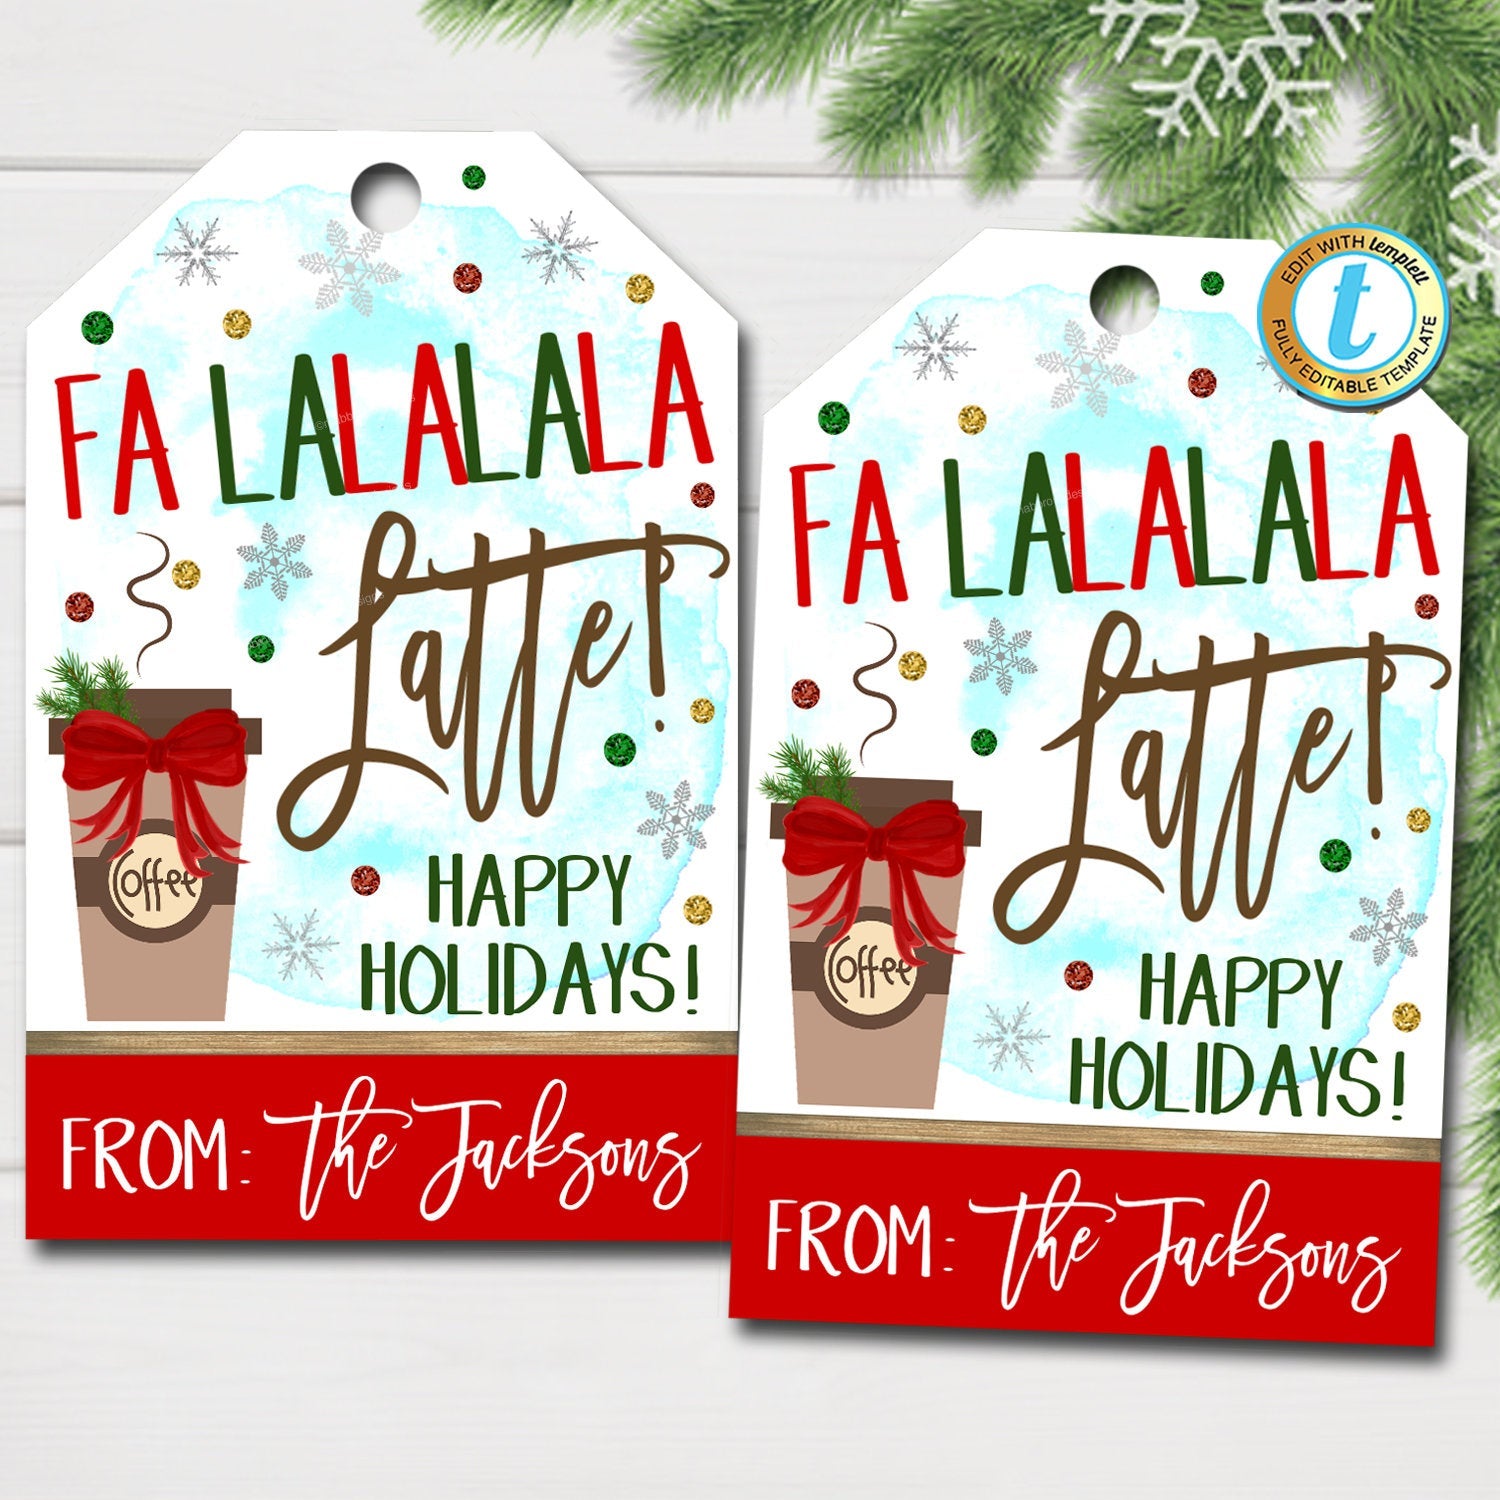 Printable 12 Days of Christmas Gift Tags Instant Download, Secret Santa  Card